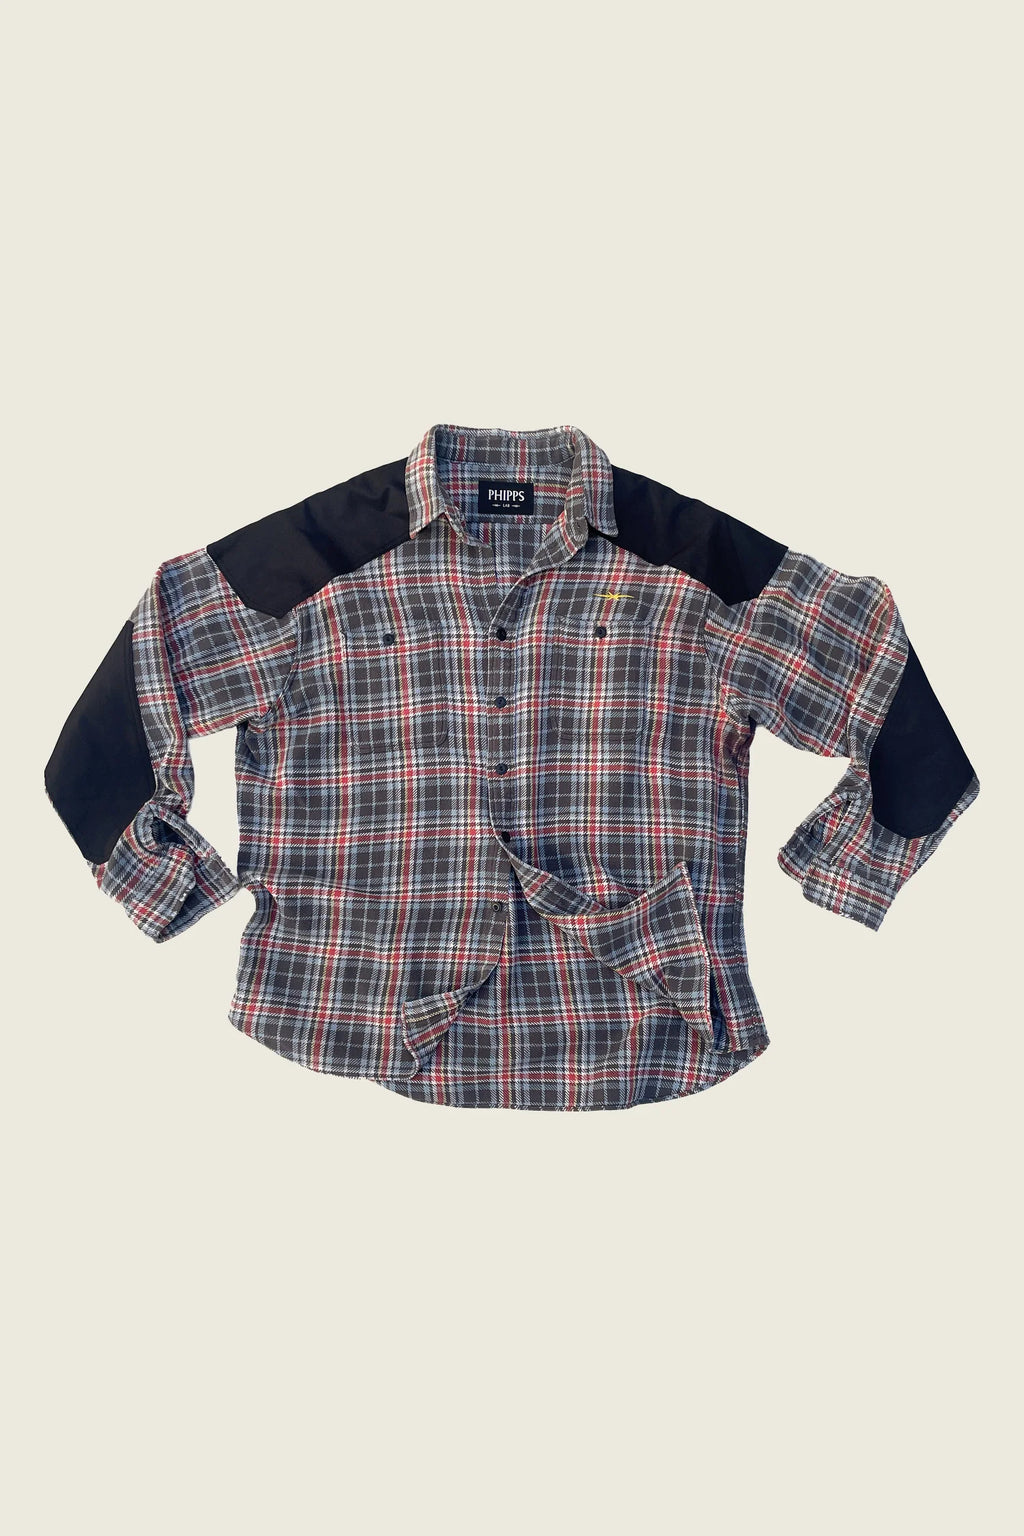 PHIPPS UPCYCLED UTILITY FLANNEL 0003